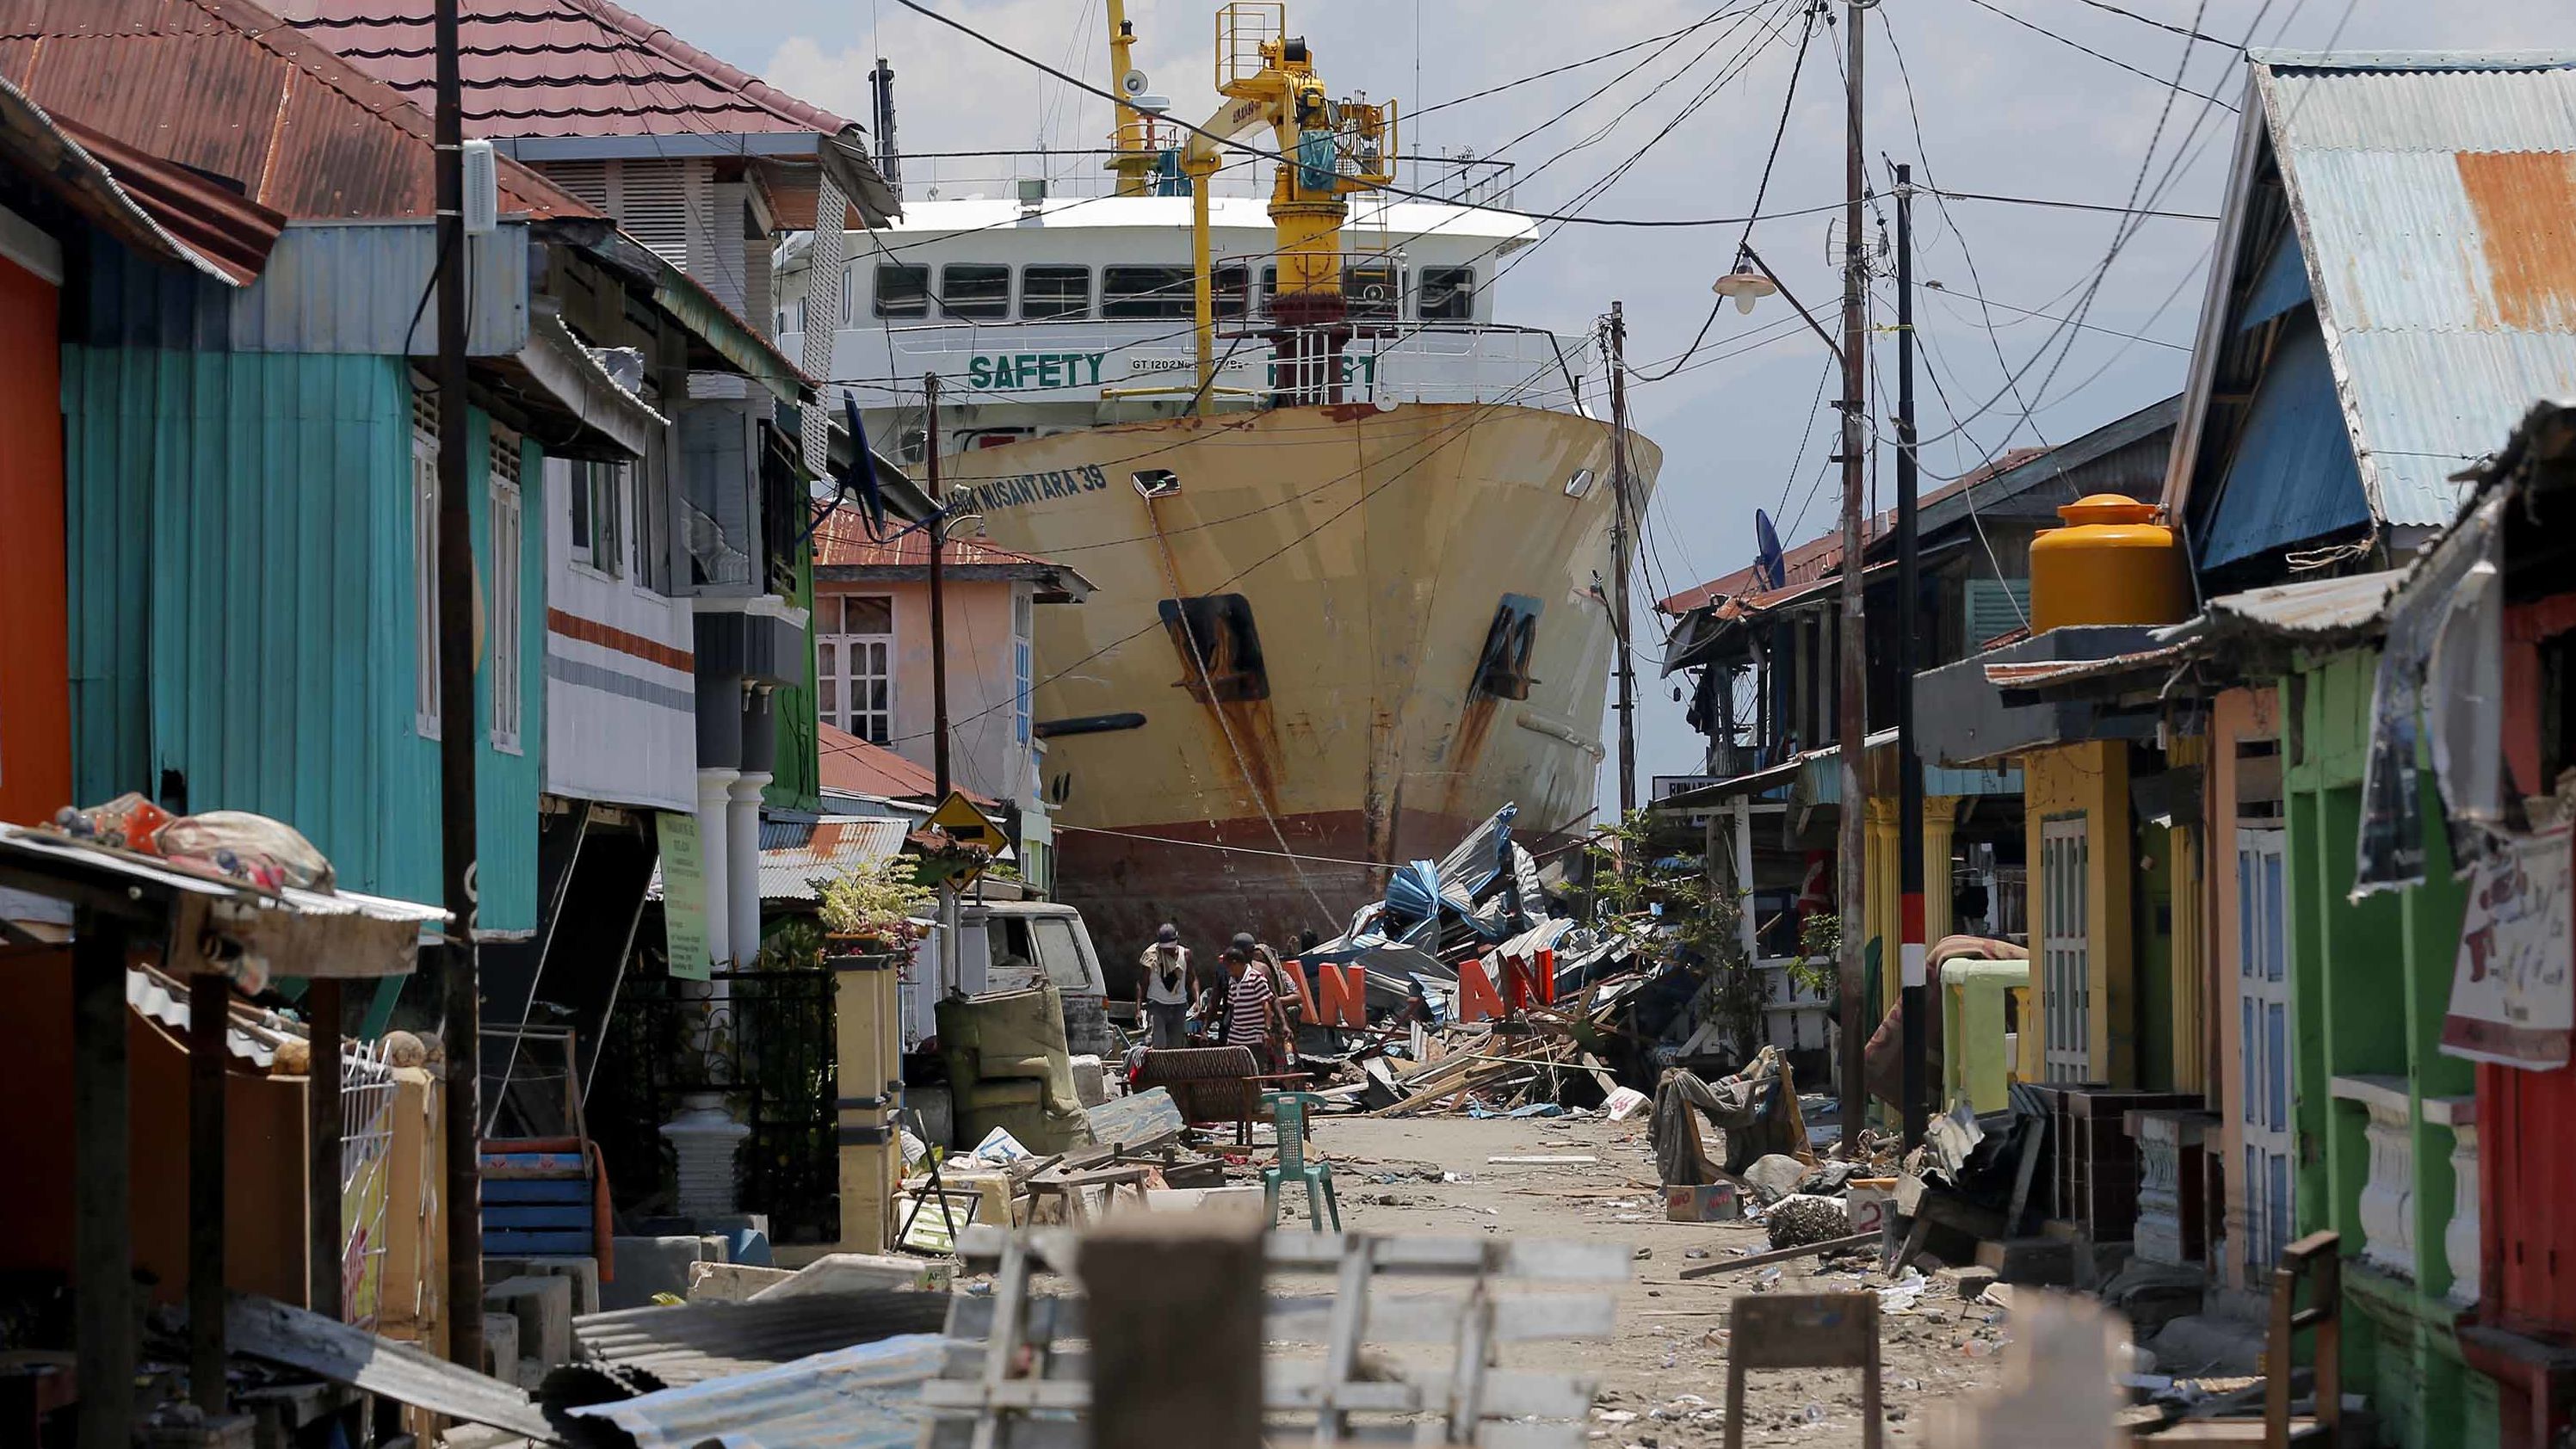 A ship that was swept ashore during the tsunami rests near houses in Donggala on October 2.